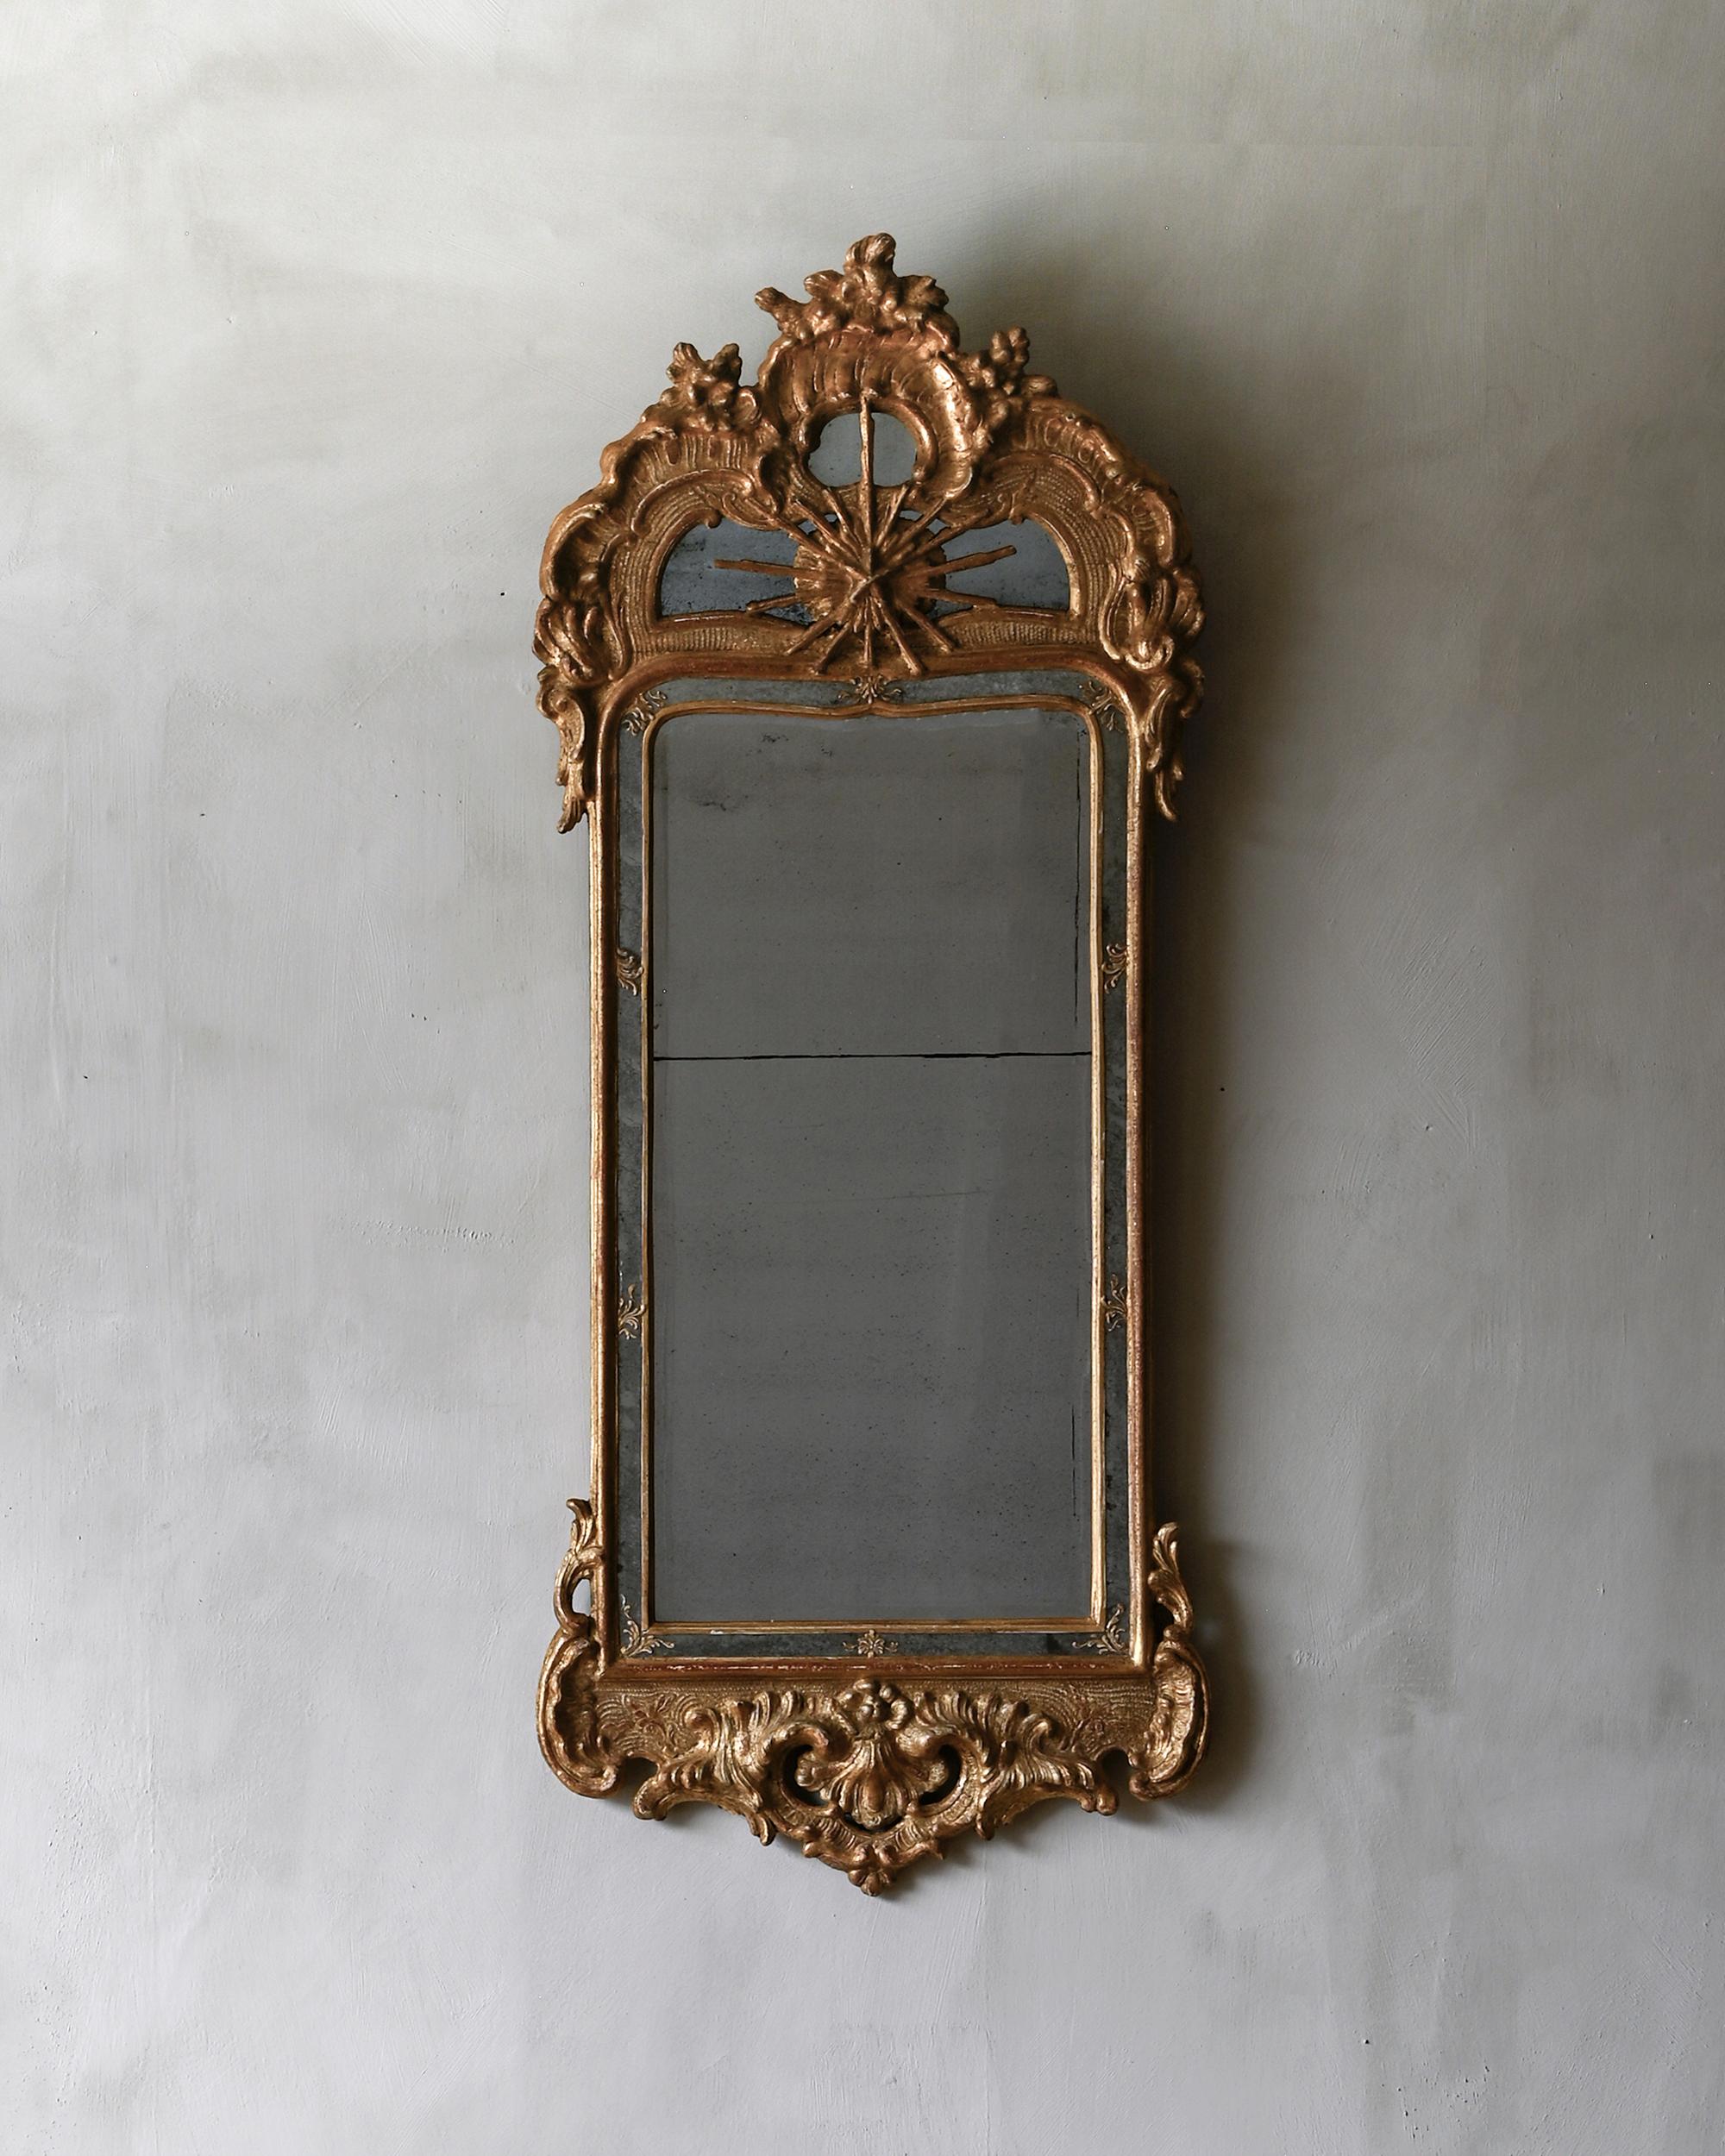 Hand-Crafted Exceptional and Rare 18th Century Swedish Rococo Mirror For Sale